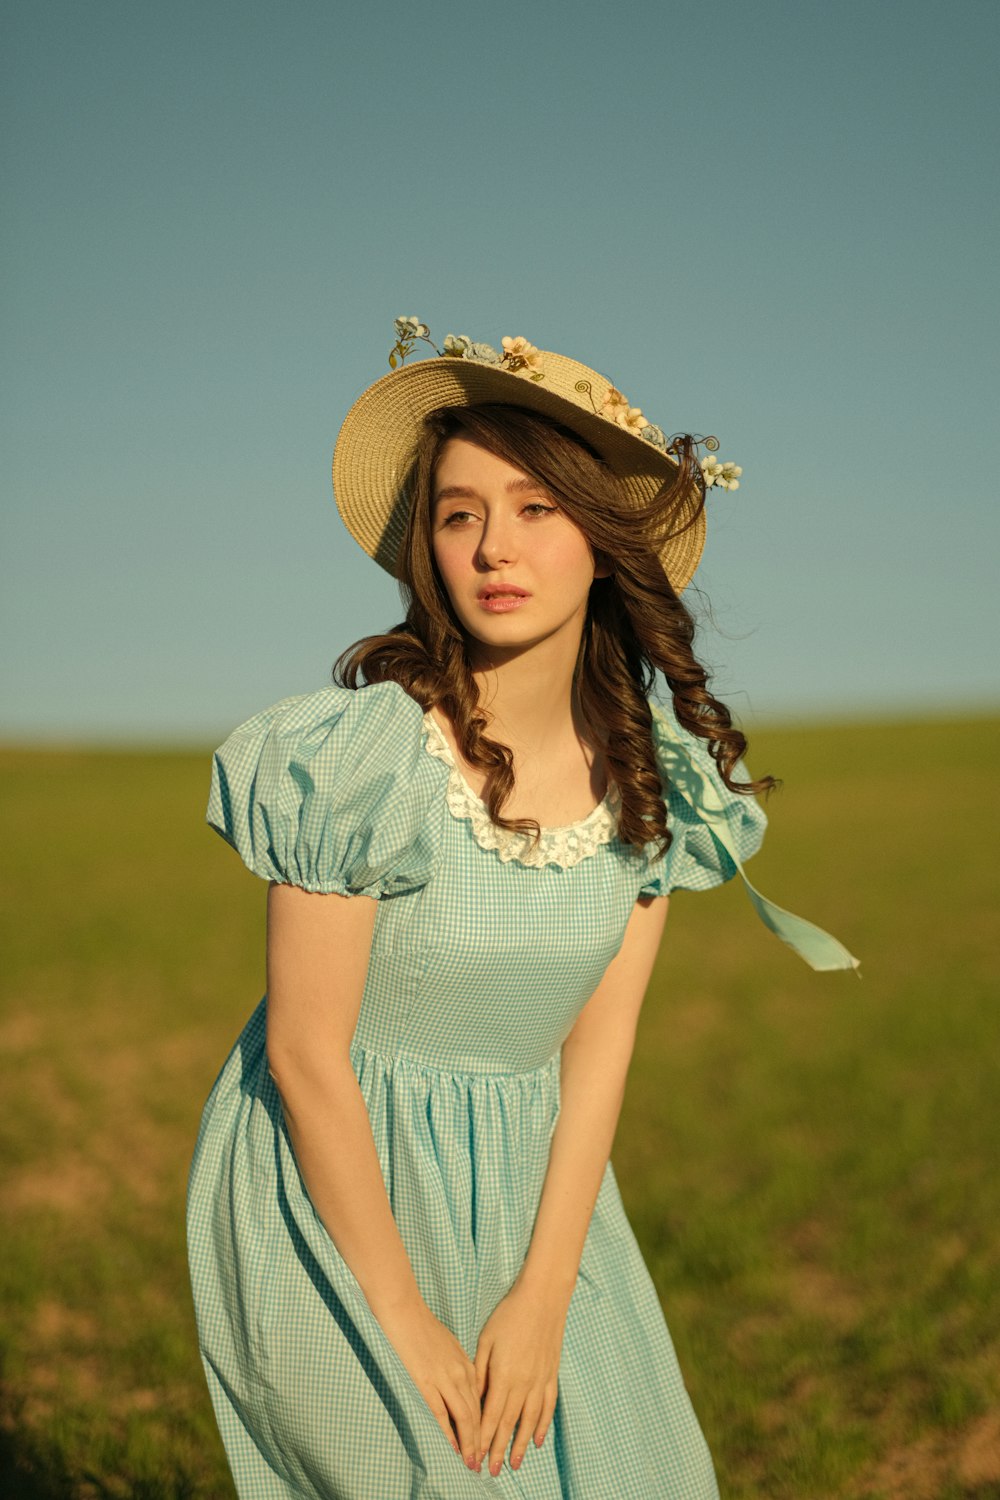 a woman in a dress and hat standing in a field